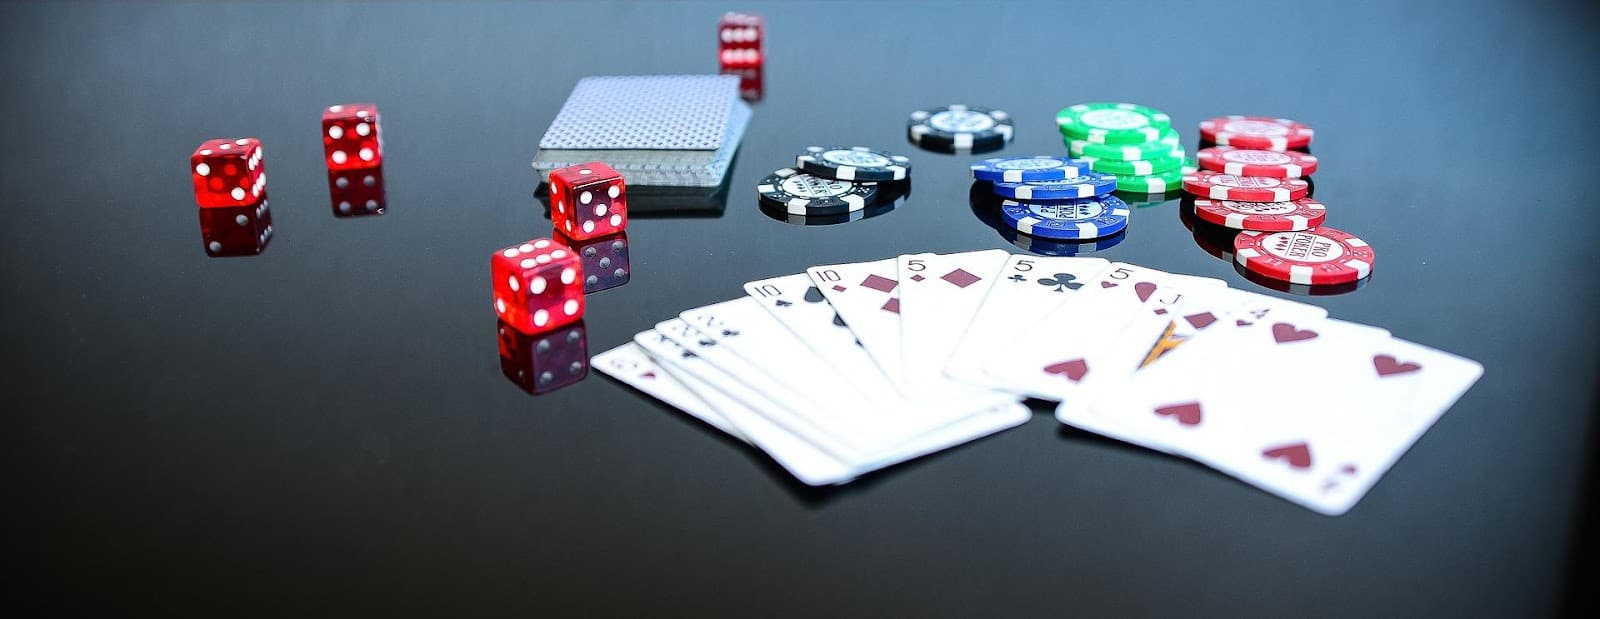 Useful Tactical Playing Styles To Help You Win at Texas Holdem